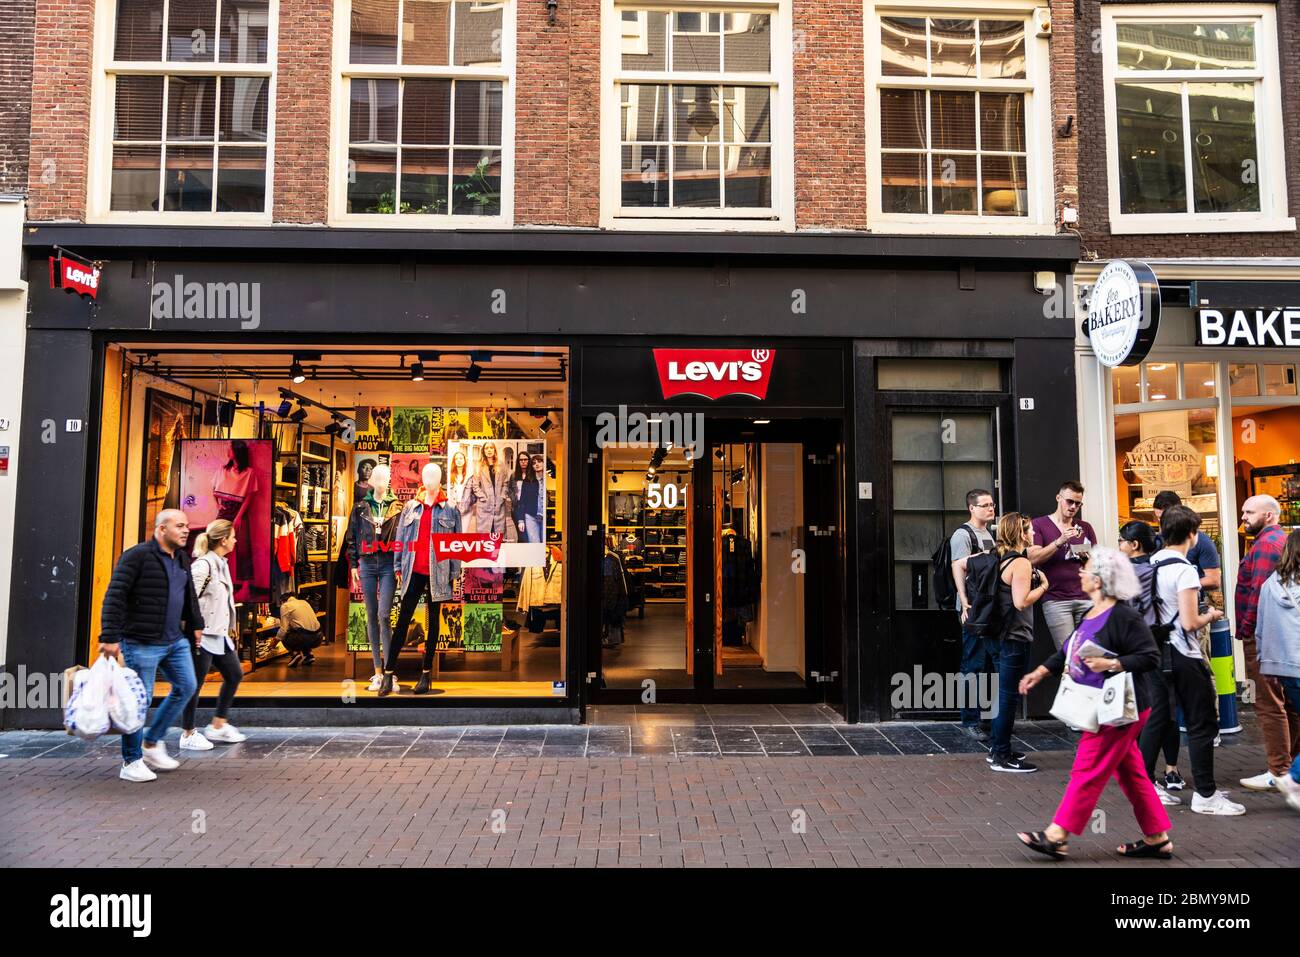 Amsterdam, Netherlands - September 9, 2018: Facade of a Levis clothing store  with people around in the center of Amsterdam, Netherlands Stock Photo -  Alamy